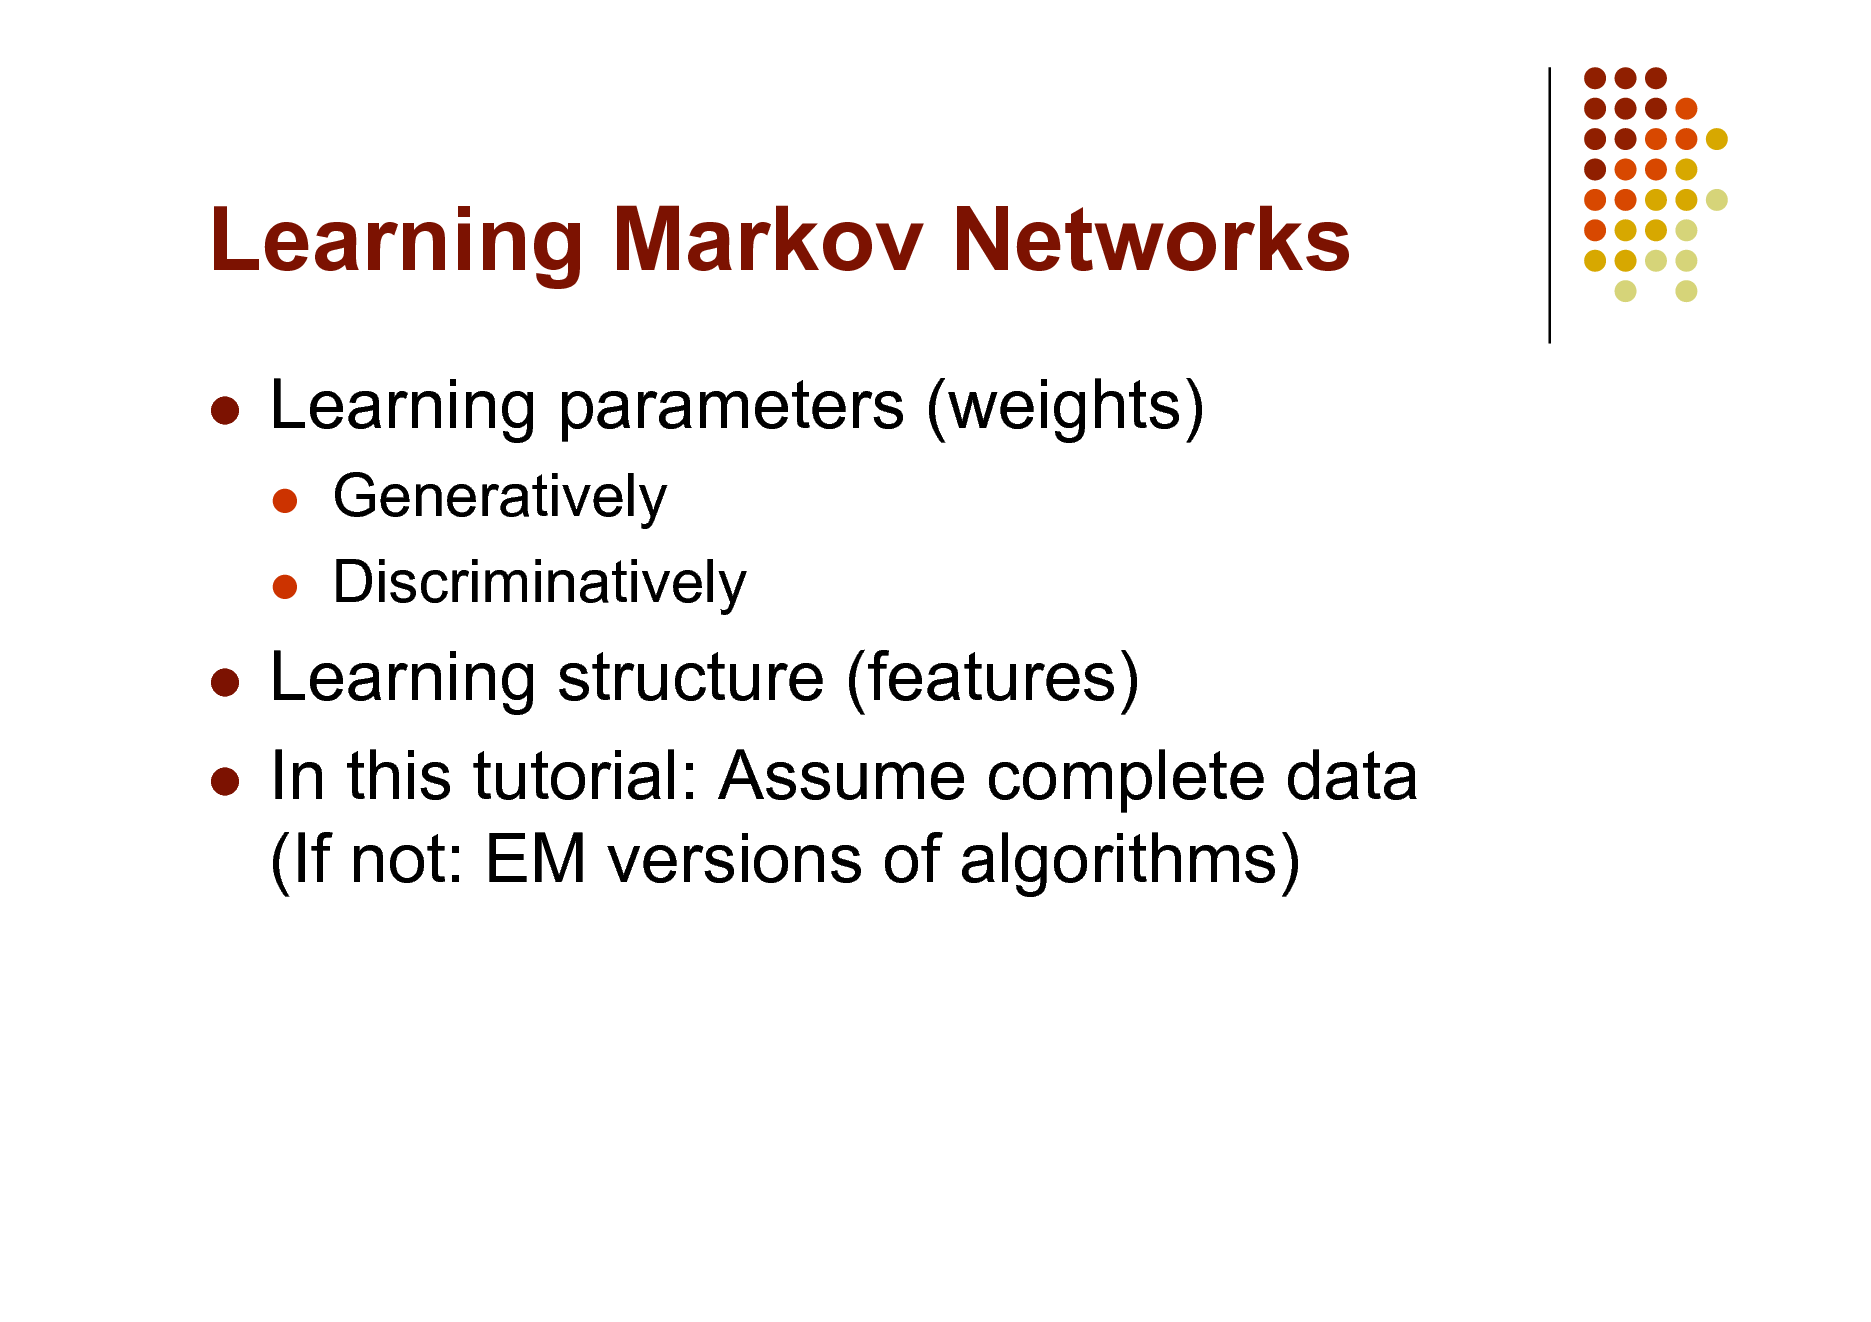 Slide: Learning Markov Networks


Learning parameters (weights)
 

Generatively Discriminatively

Learning structure (features)  In this tutorial: Assume complete data (If not: EM versions of algorithms)


